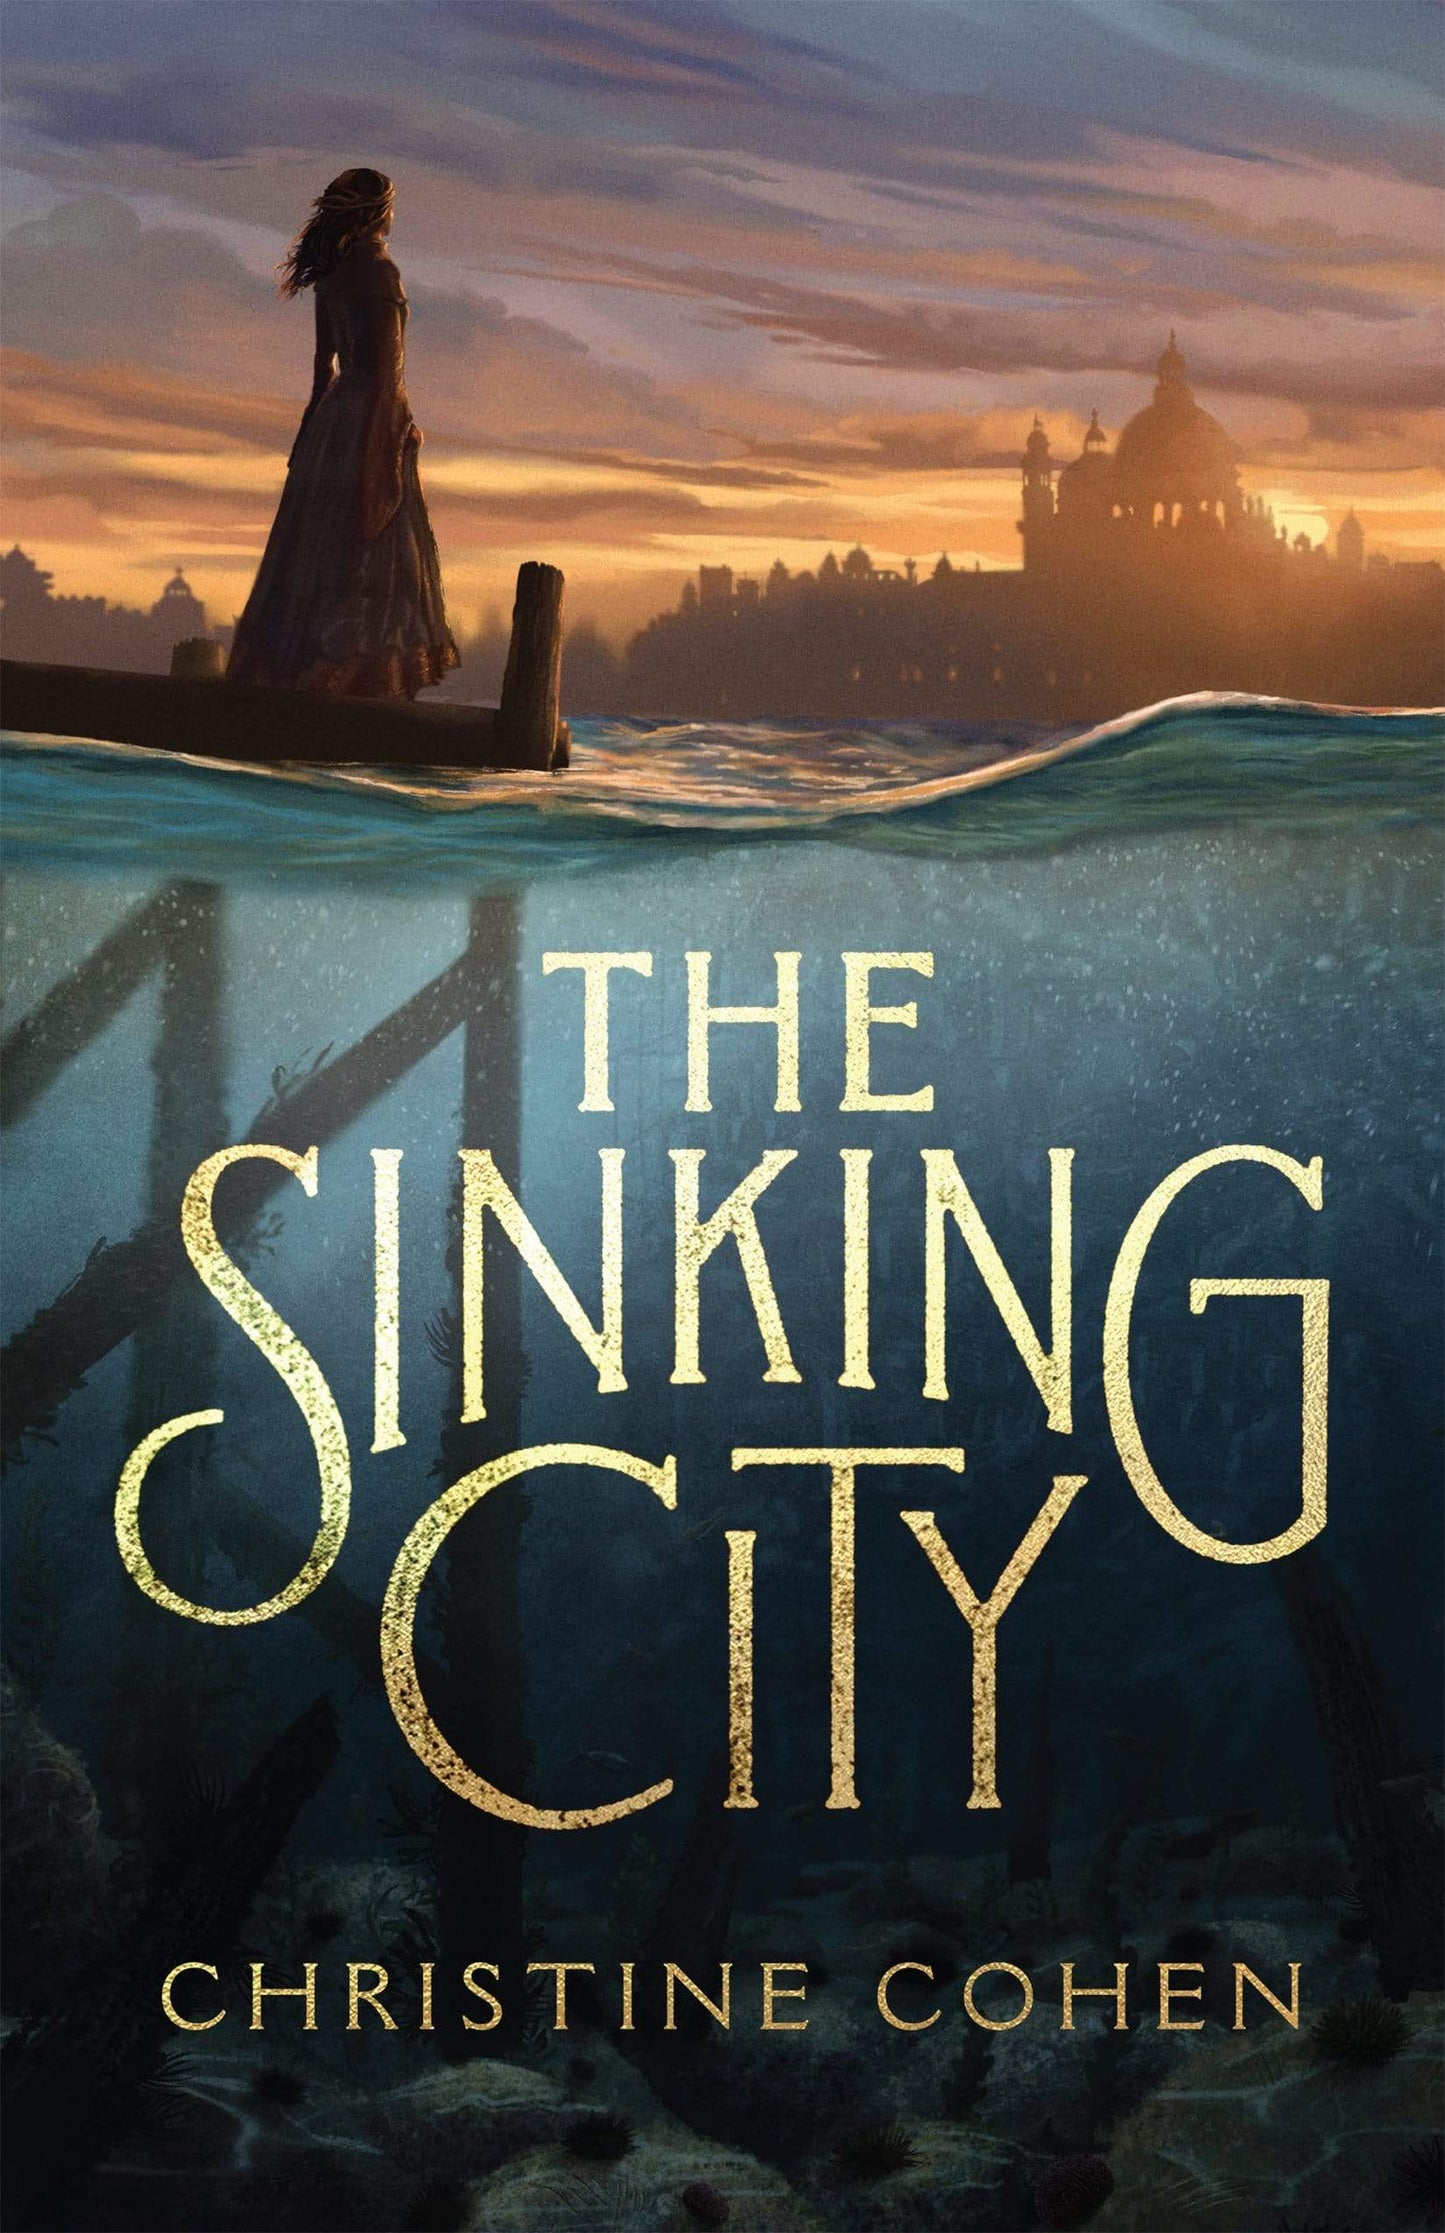 Sinking City (Cohen - HC) >>out of stock with publisher<<